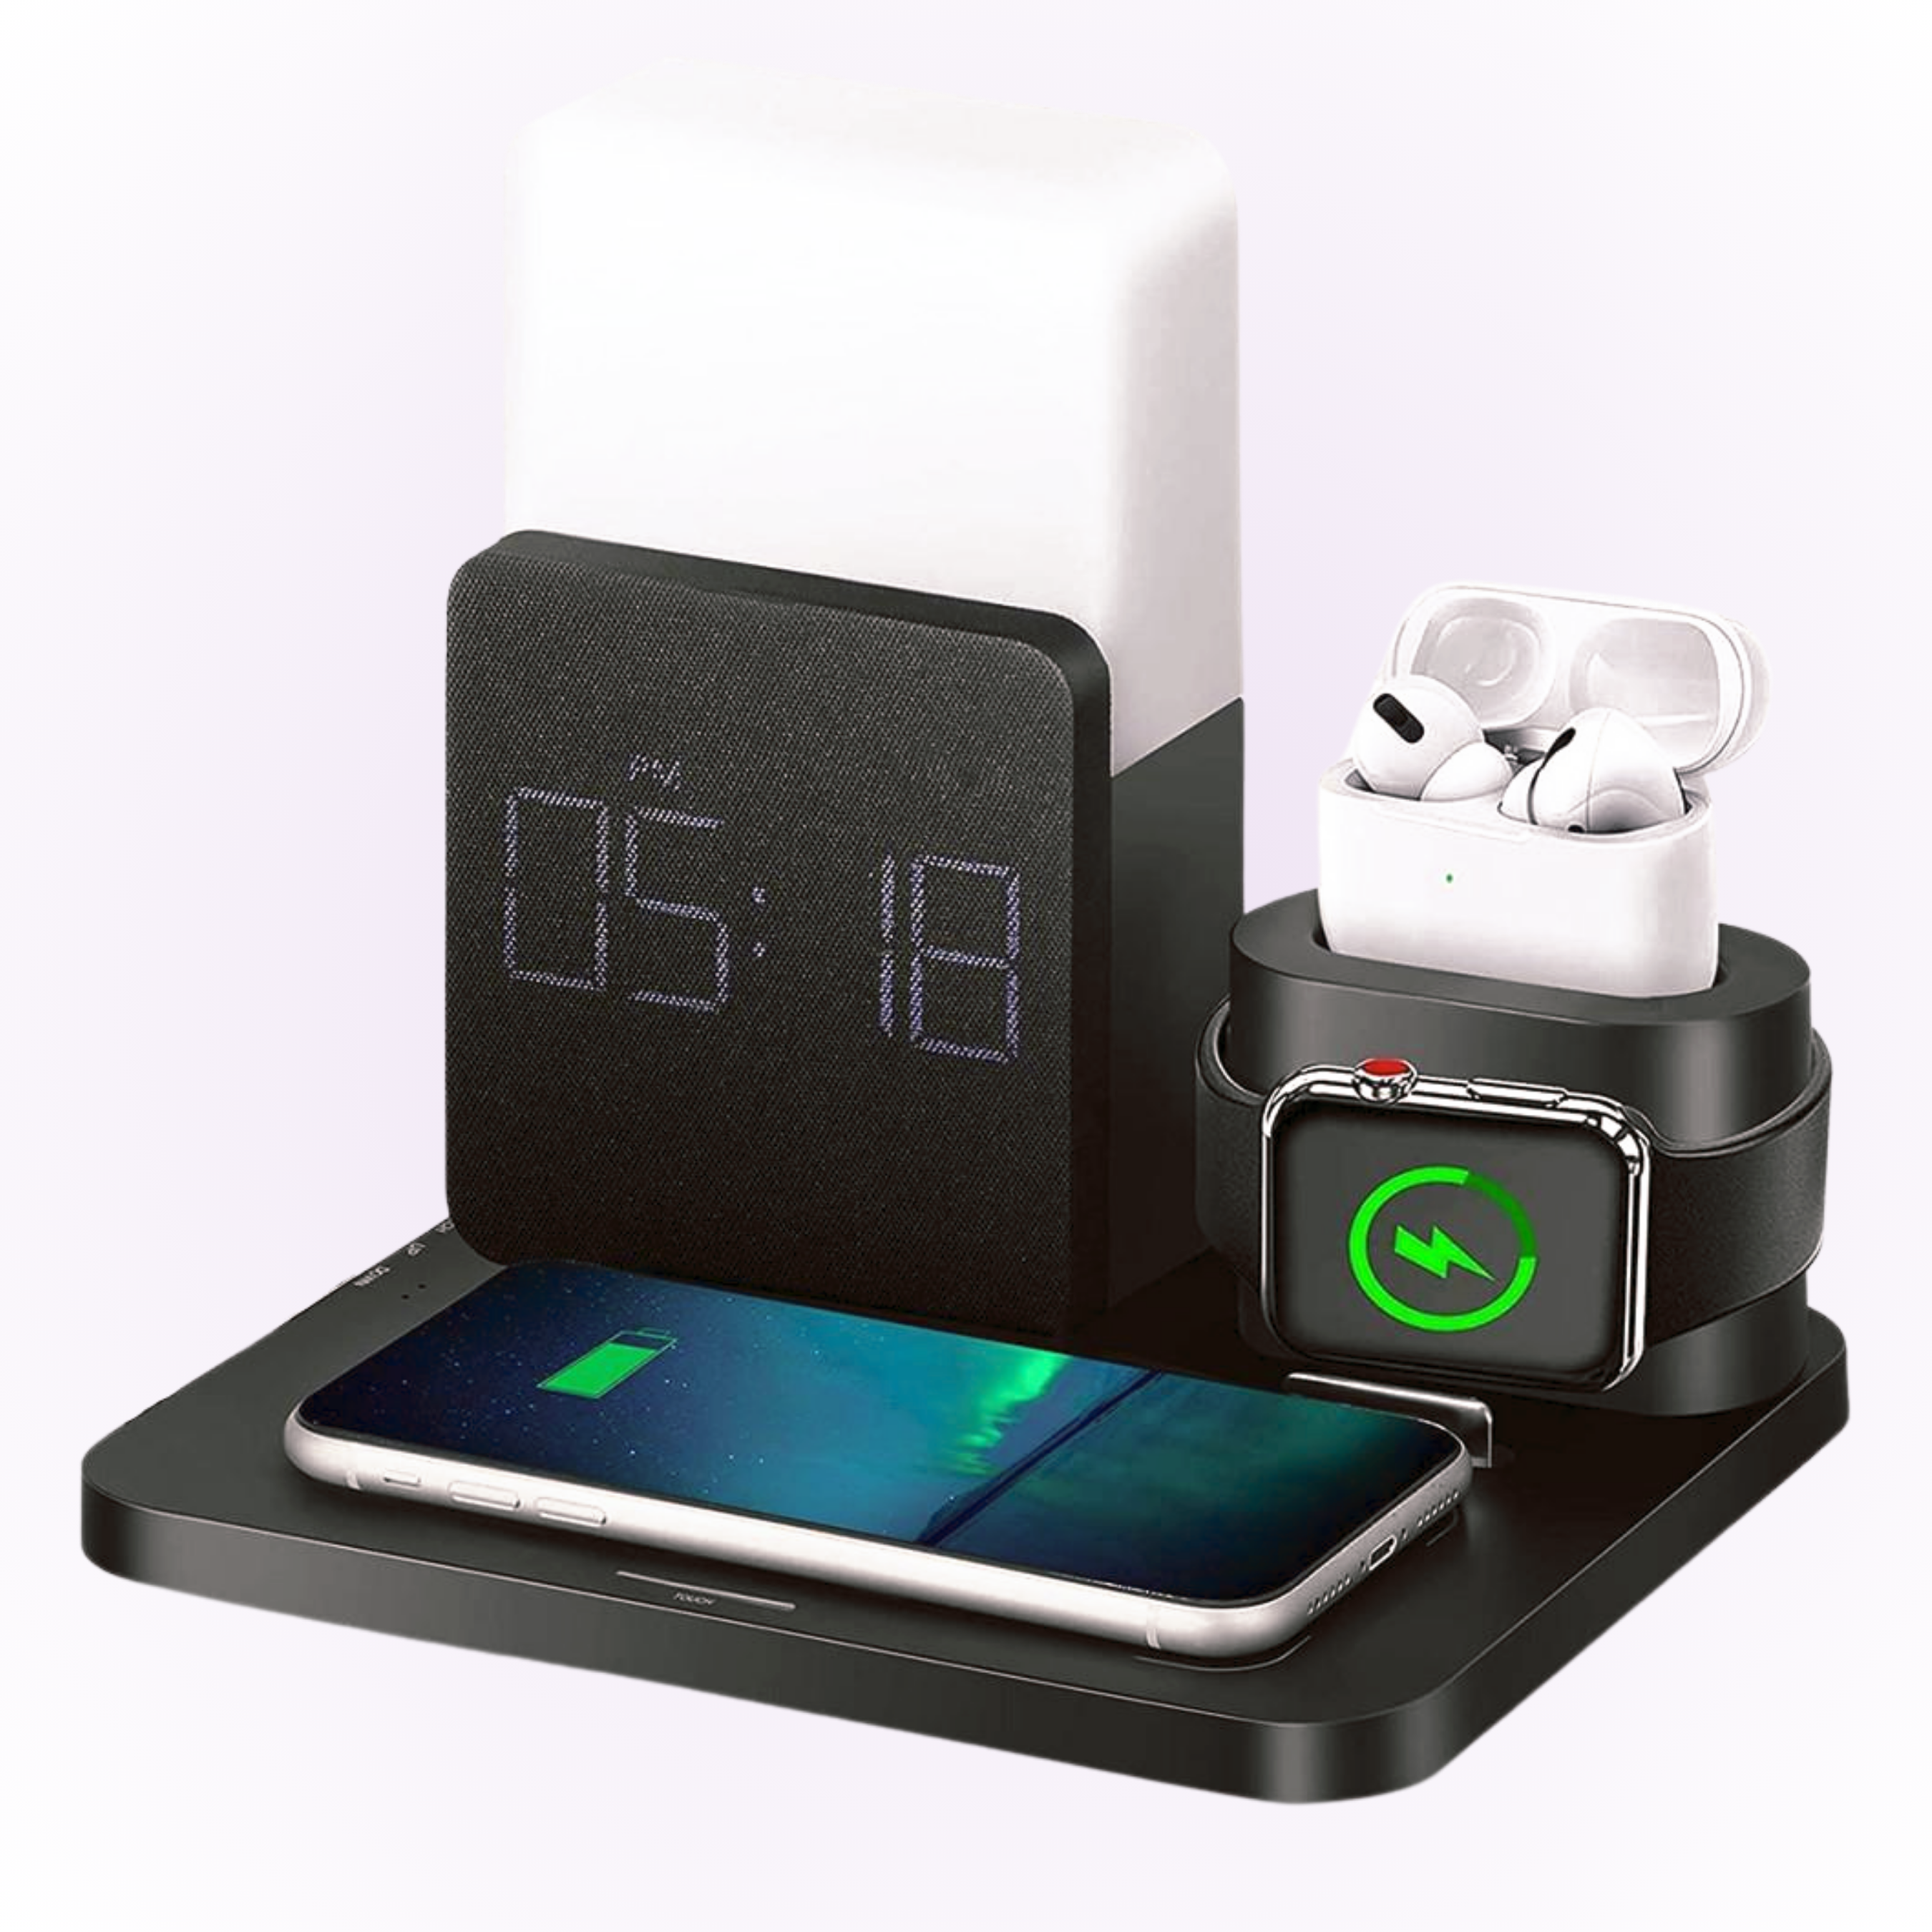 Black alarm clock with wireless charging iphone, airpods and apple watch